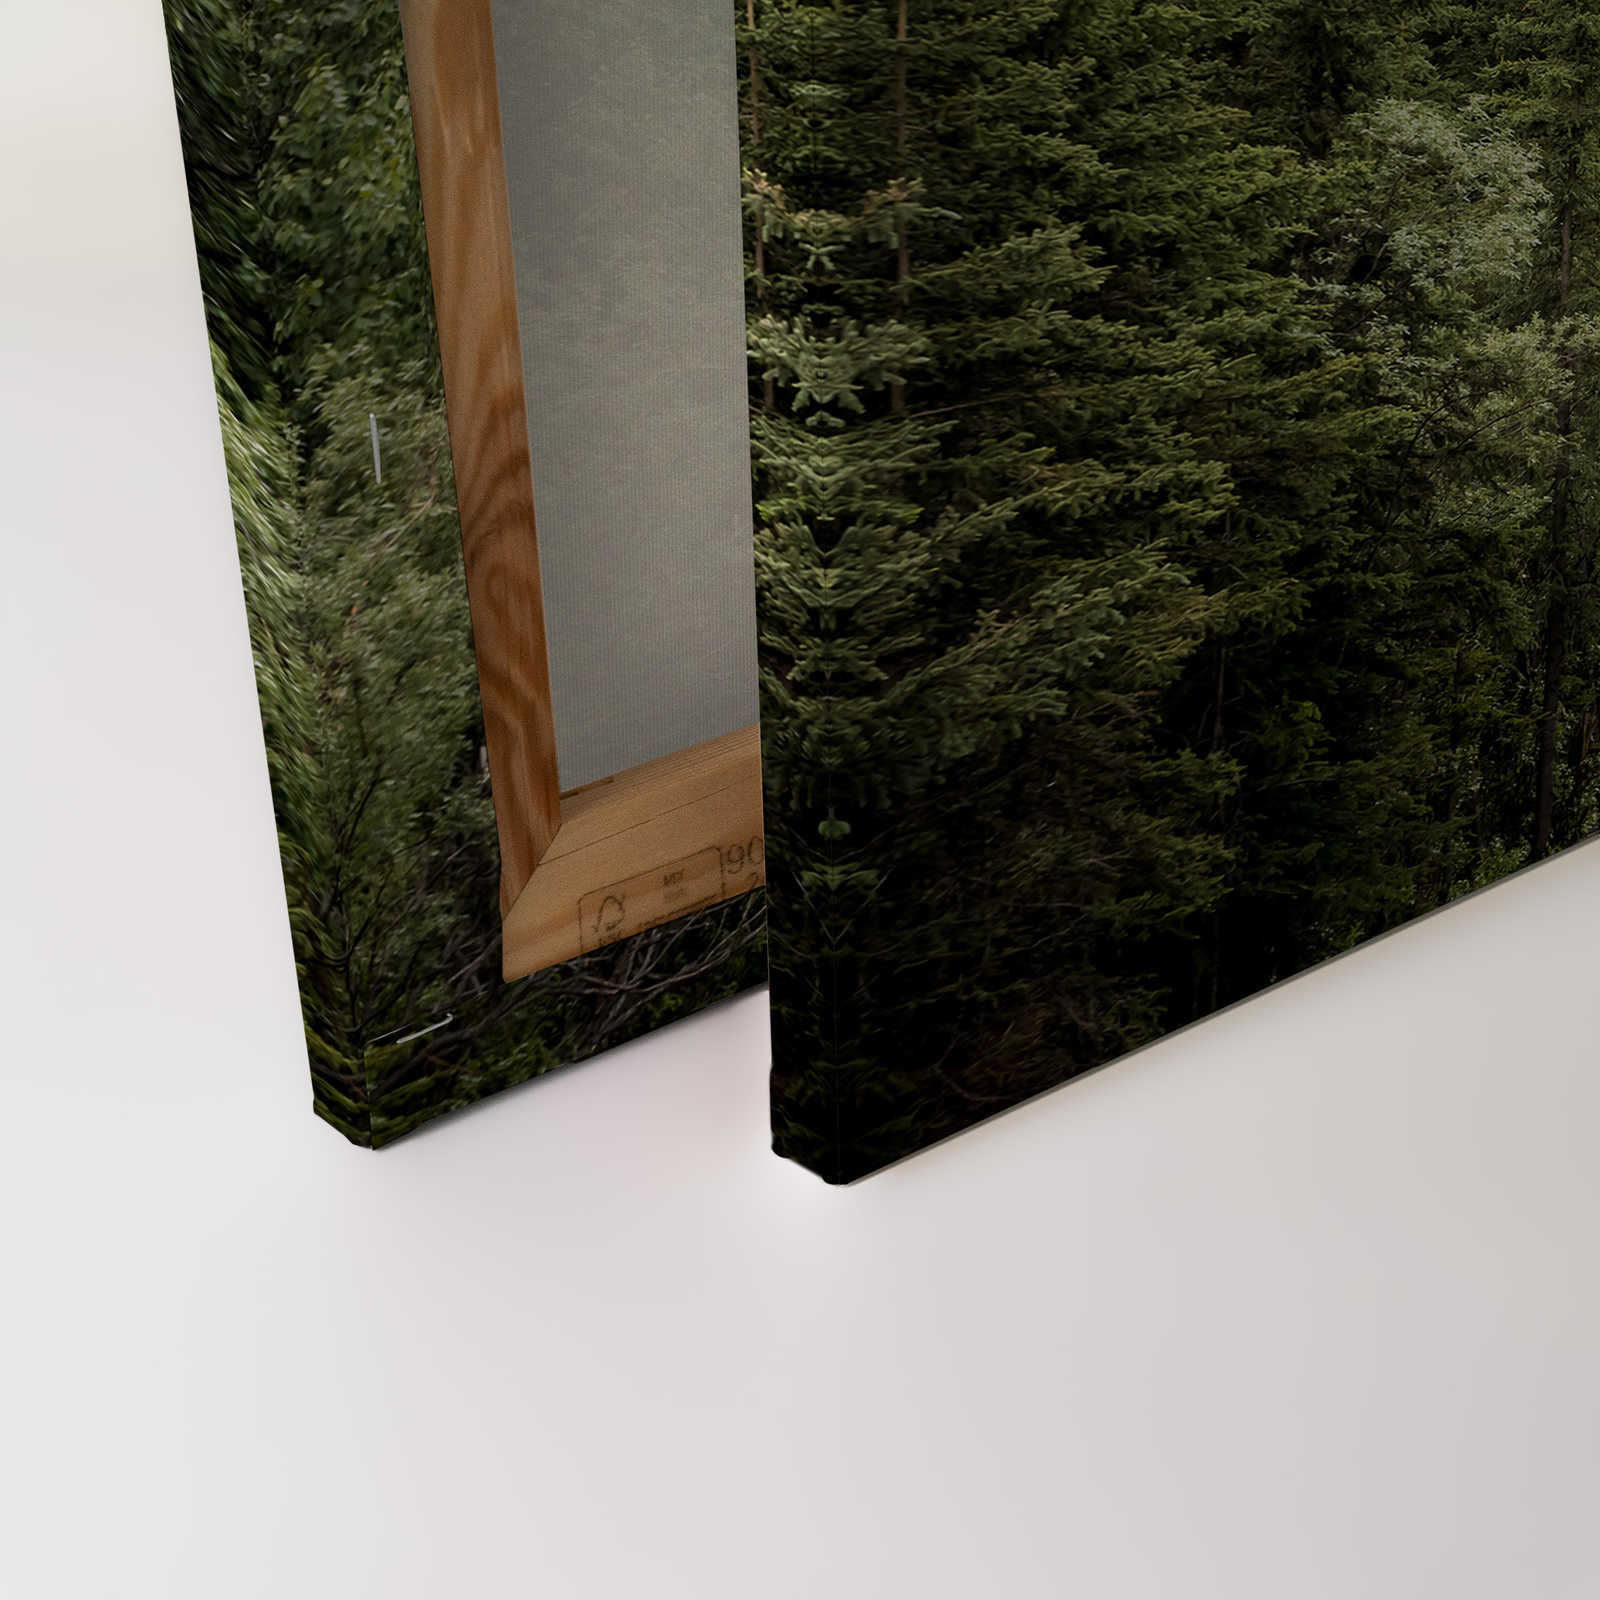             Canvas painting with train tracks through a forest by the mountains - 0.90 m x 0.60 m
        